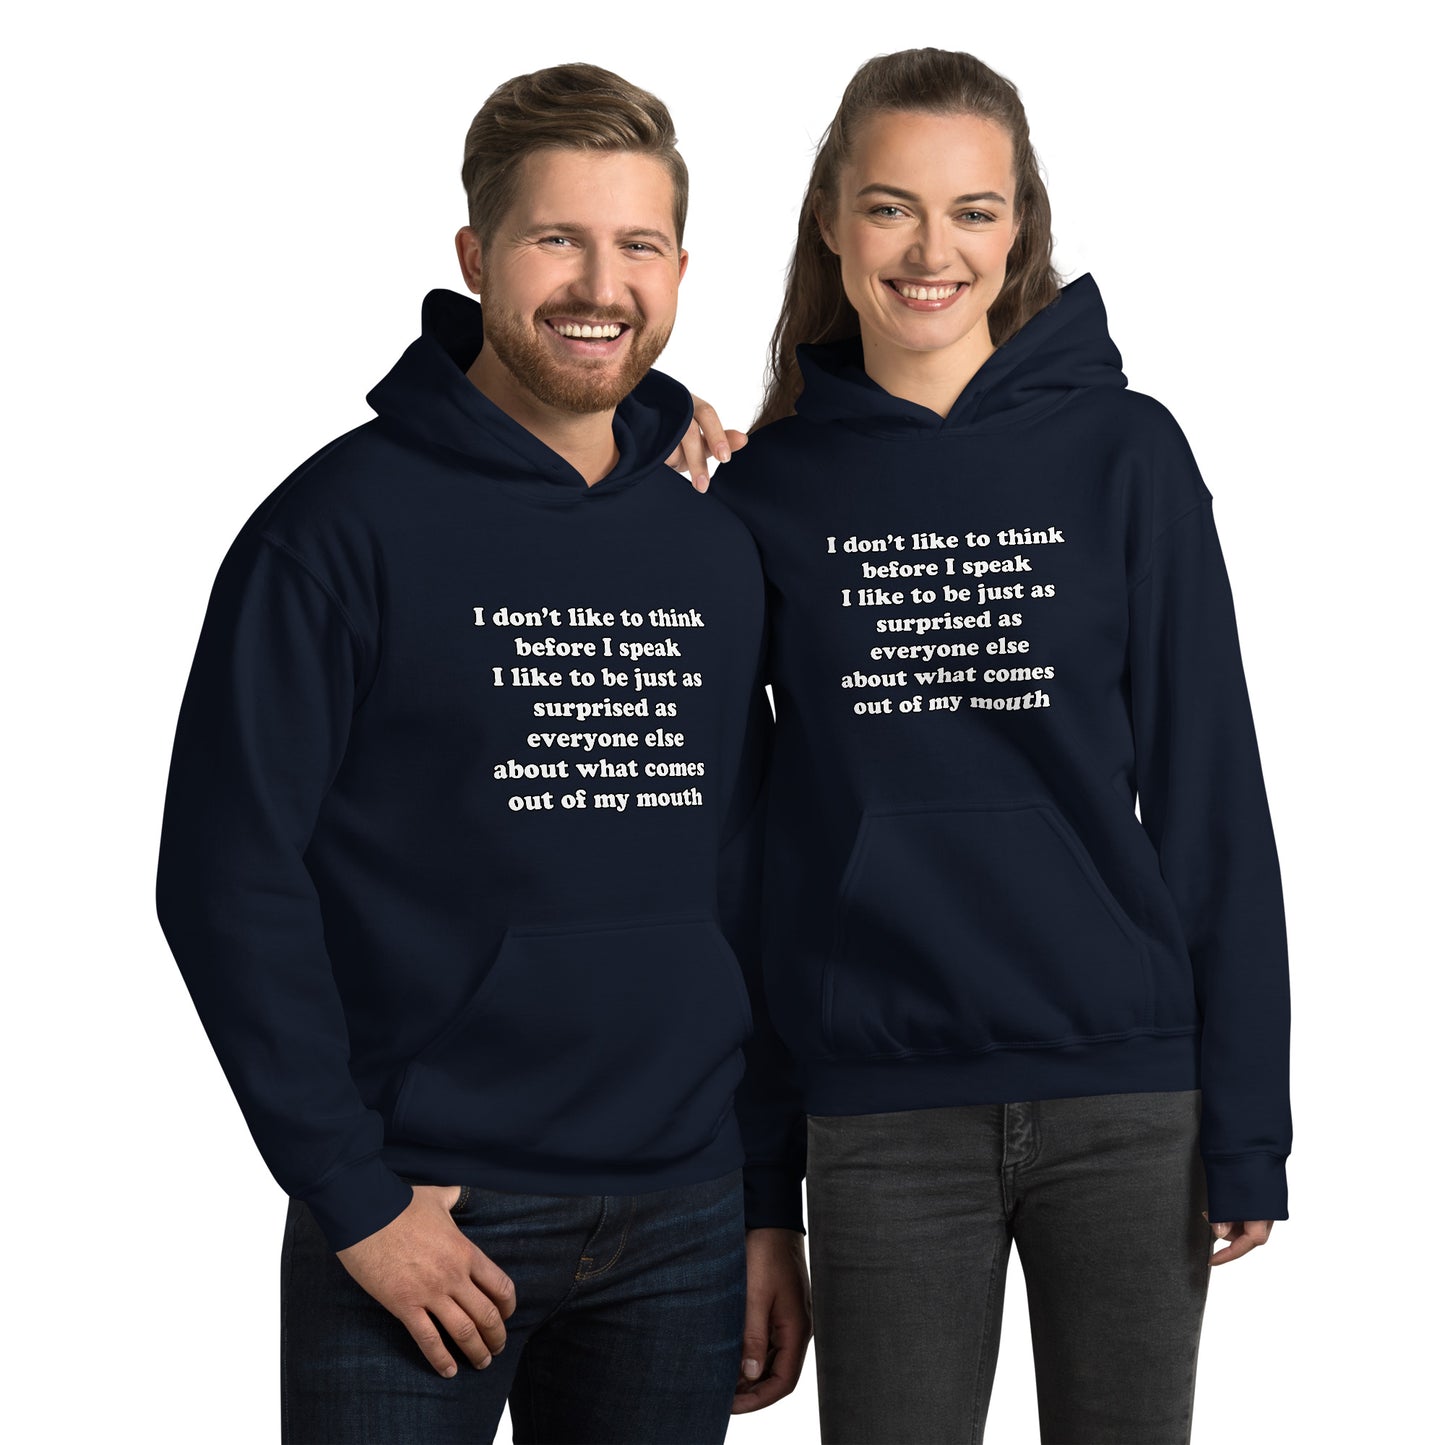 Man and woman with navy blue hoodie with text “I don't think before I speak Just as serprised as everyone about what comes out of my mouth"